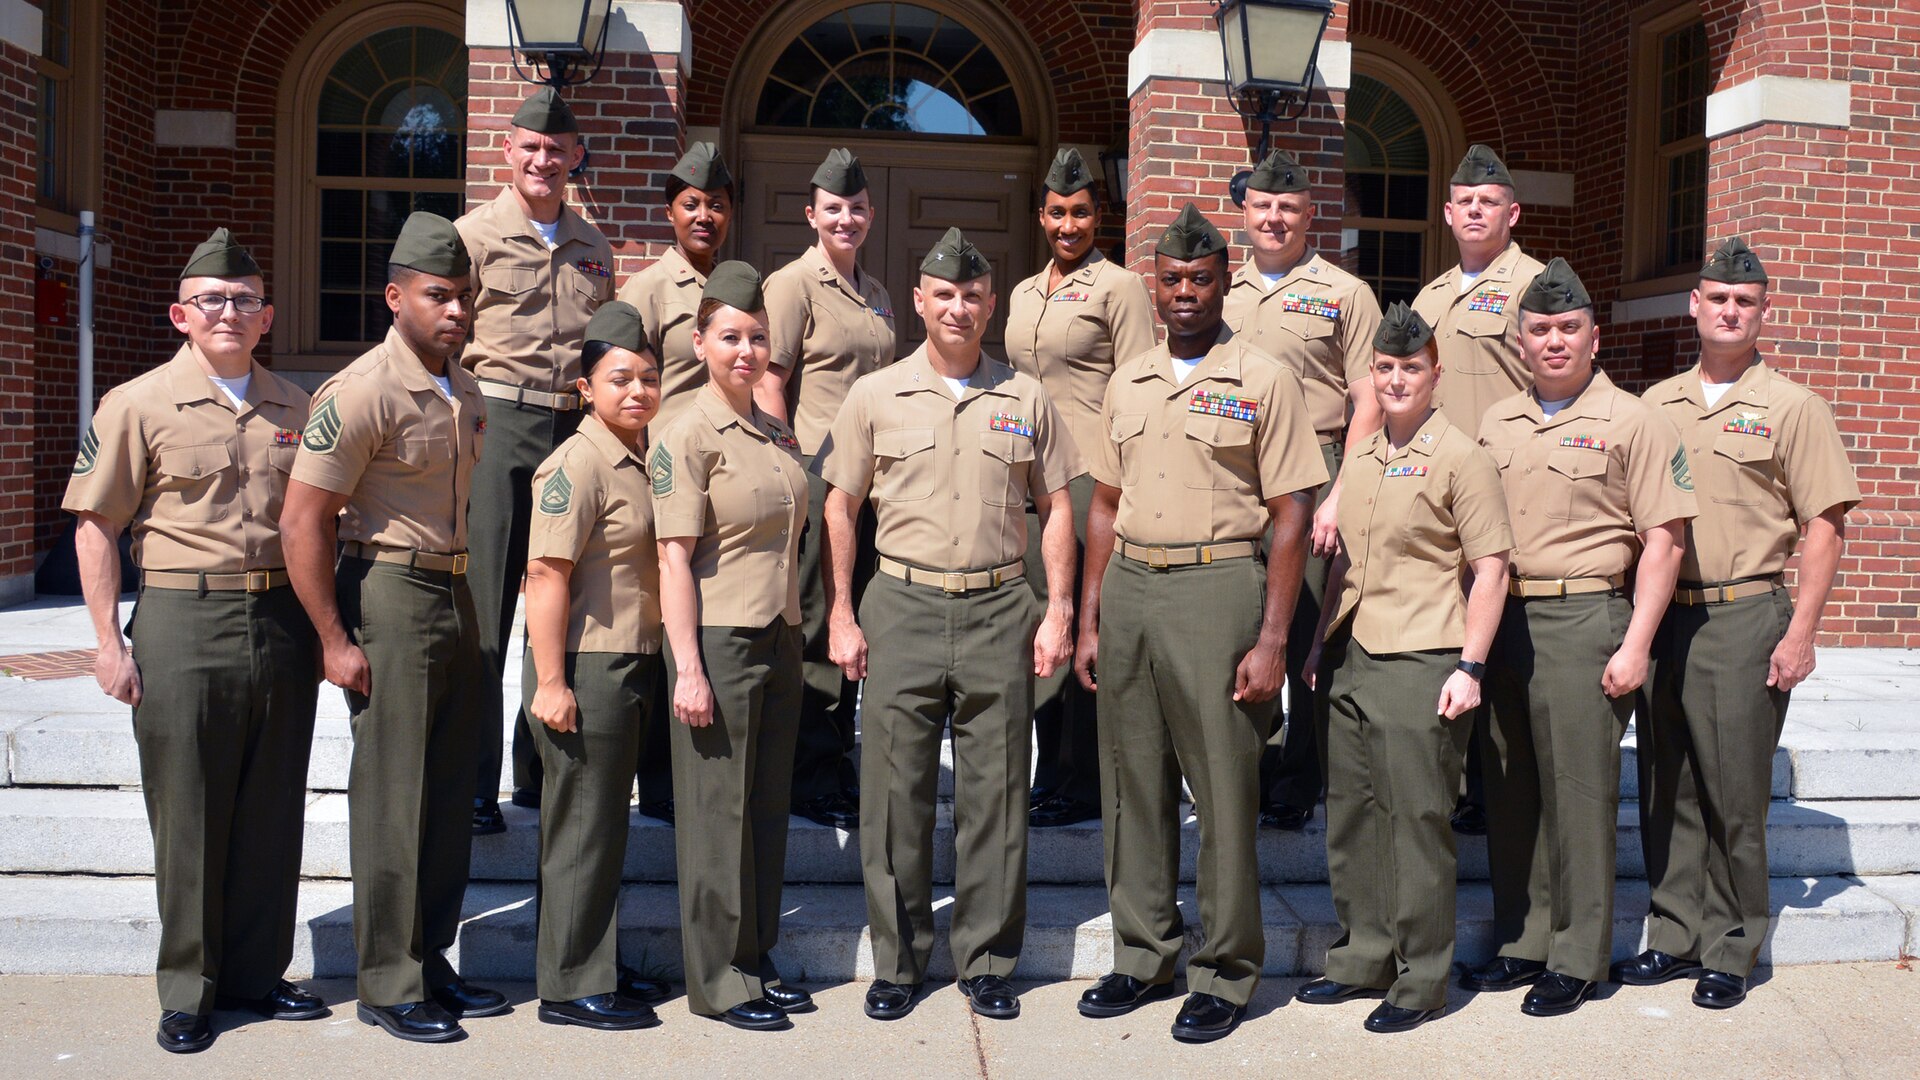 DLA Aviation’s Marine Corps Customer Facing Division servicemembers pose for a picture at Defense Supply Center Richmond, Virginia, May 30. When the Marines return to their operational units, they’ll have an understanding of how “big” DLA works and the ability to train and advise their fellow Marines in DLA procurement processes. Photo by Jackie Roberts